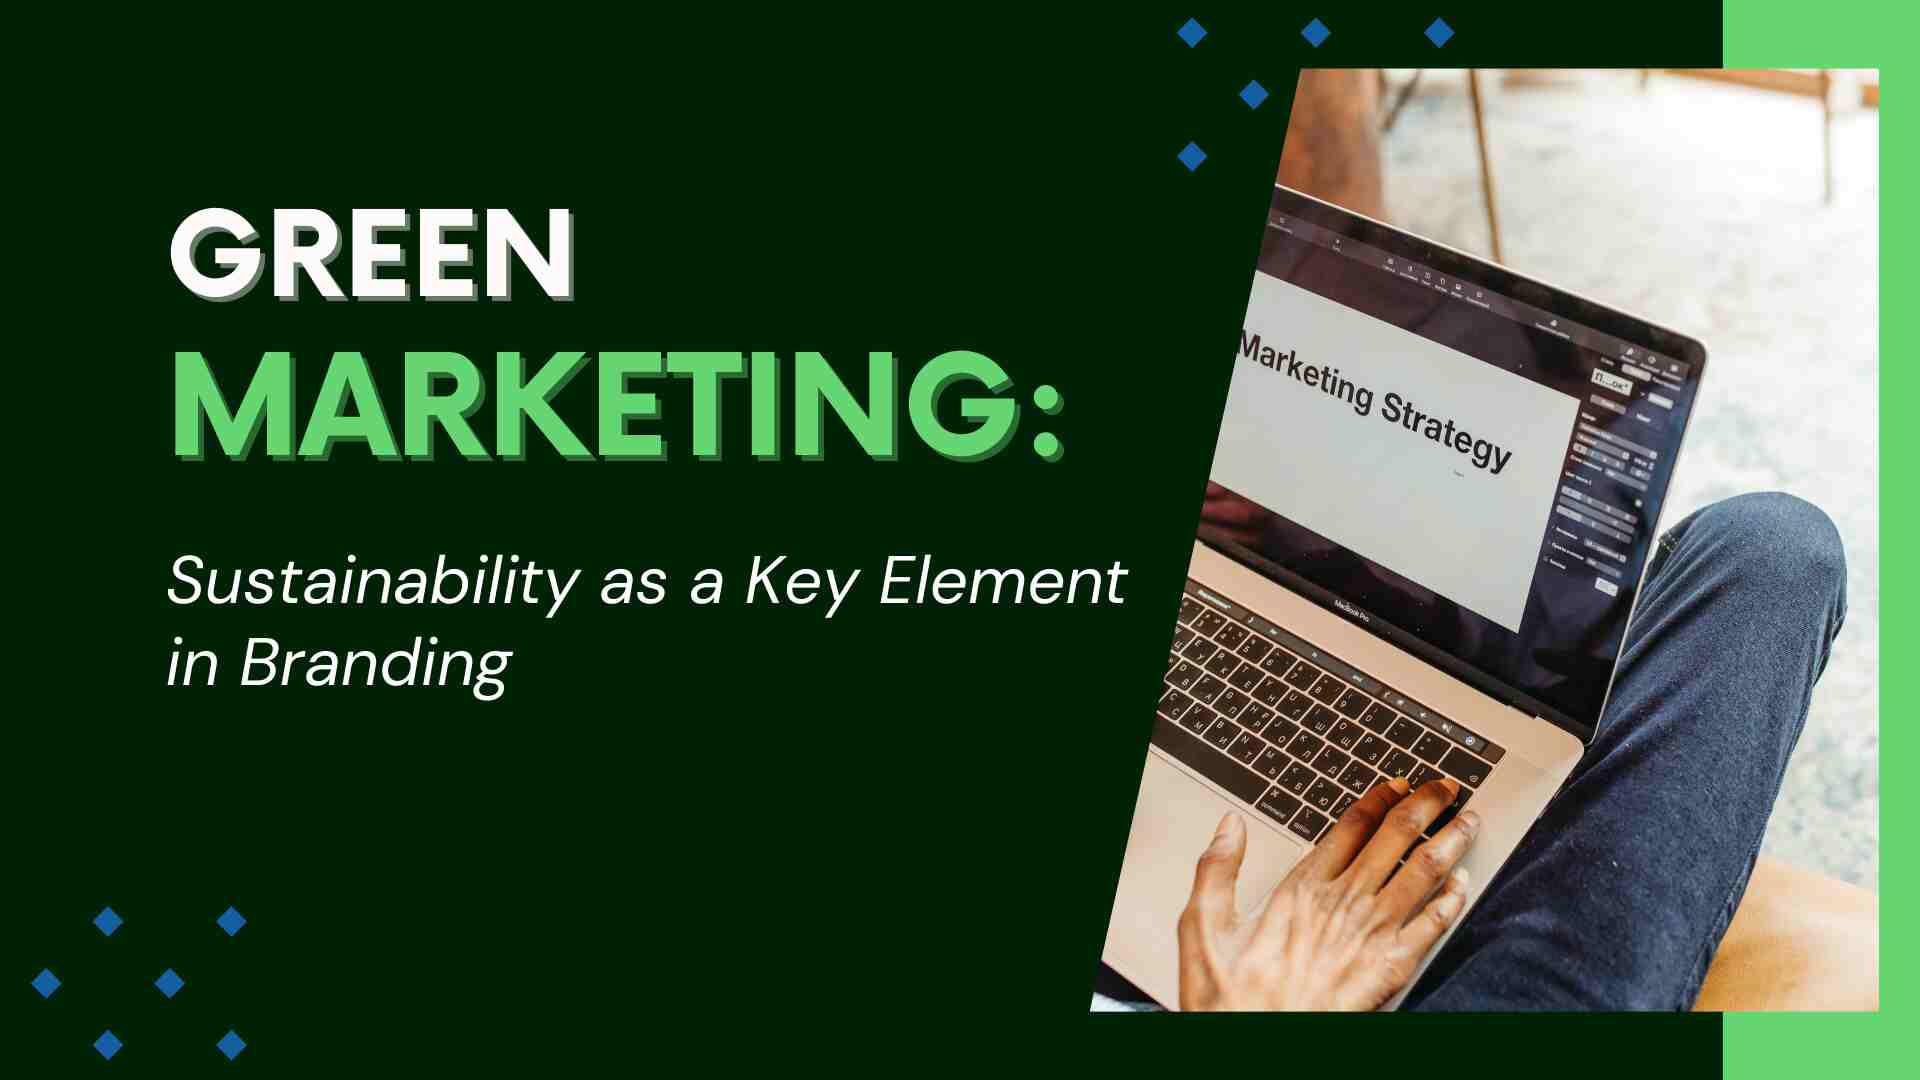 Green Marketing: Sustainability as a Key Element in Branding